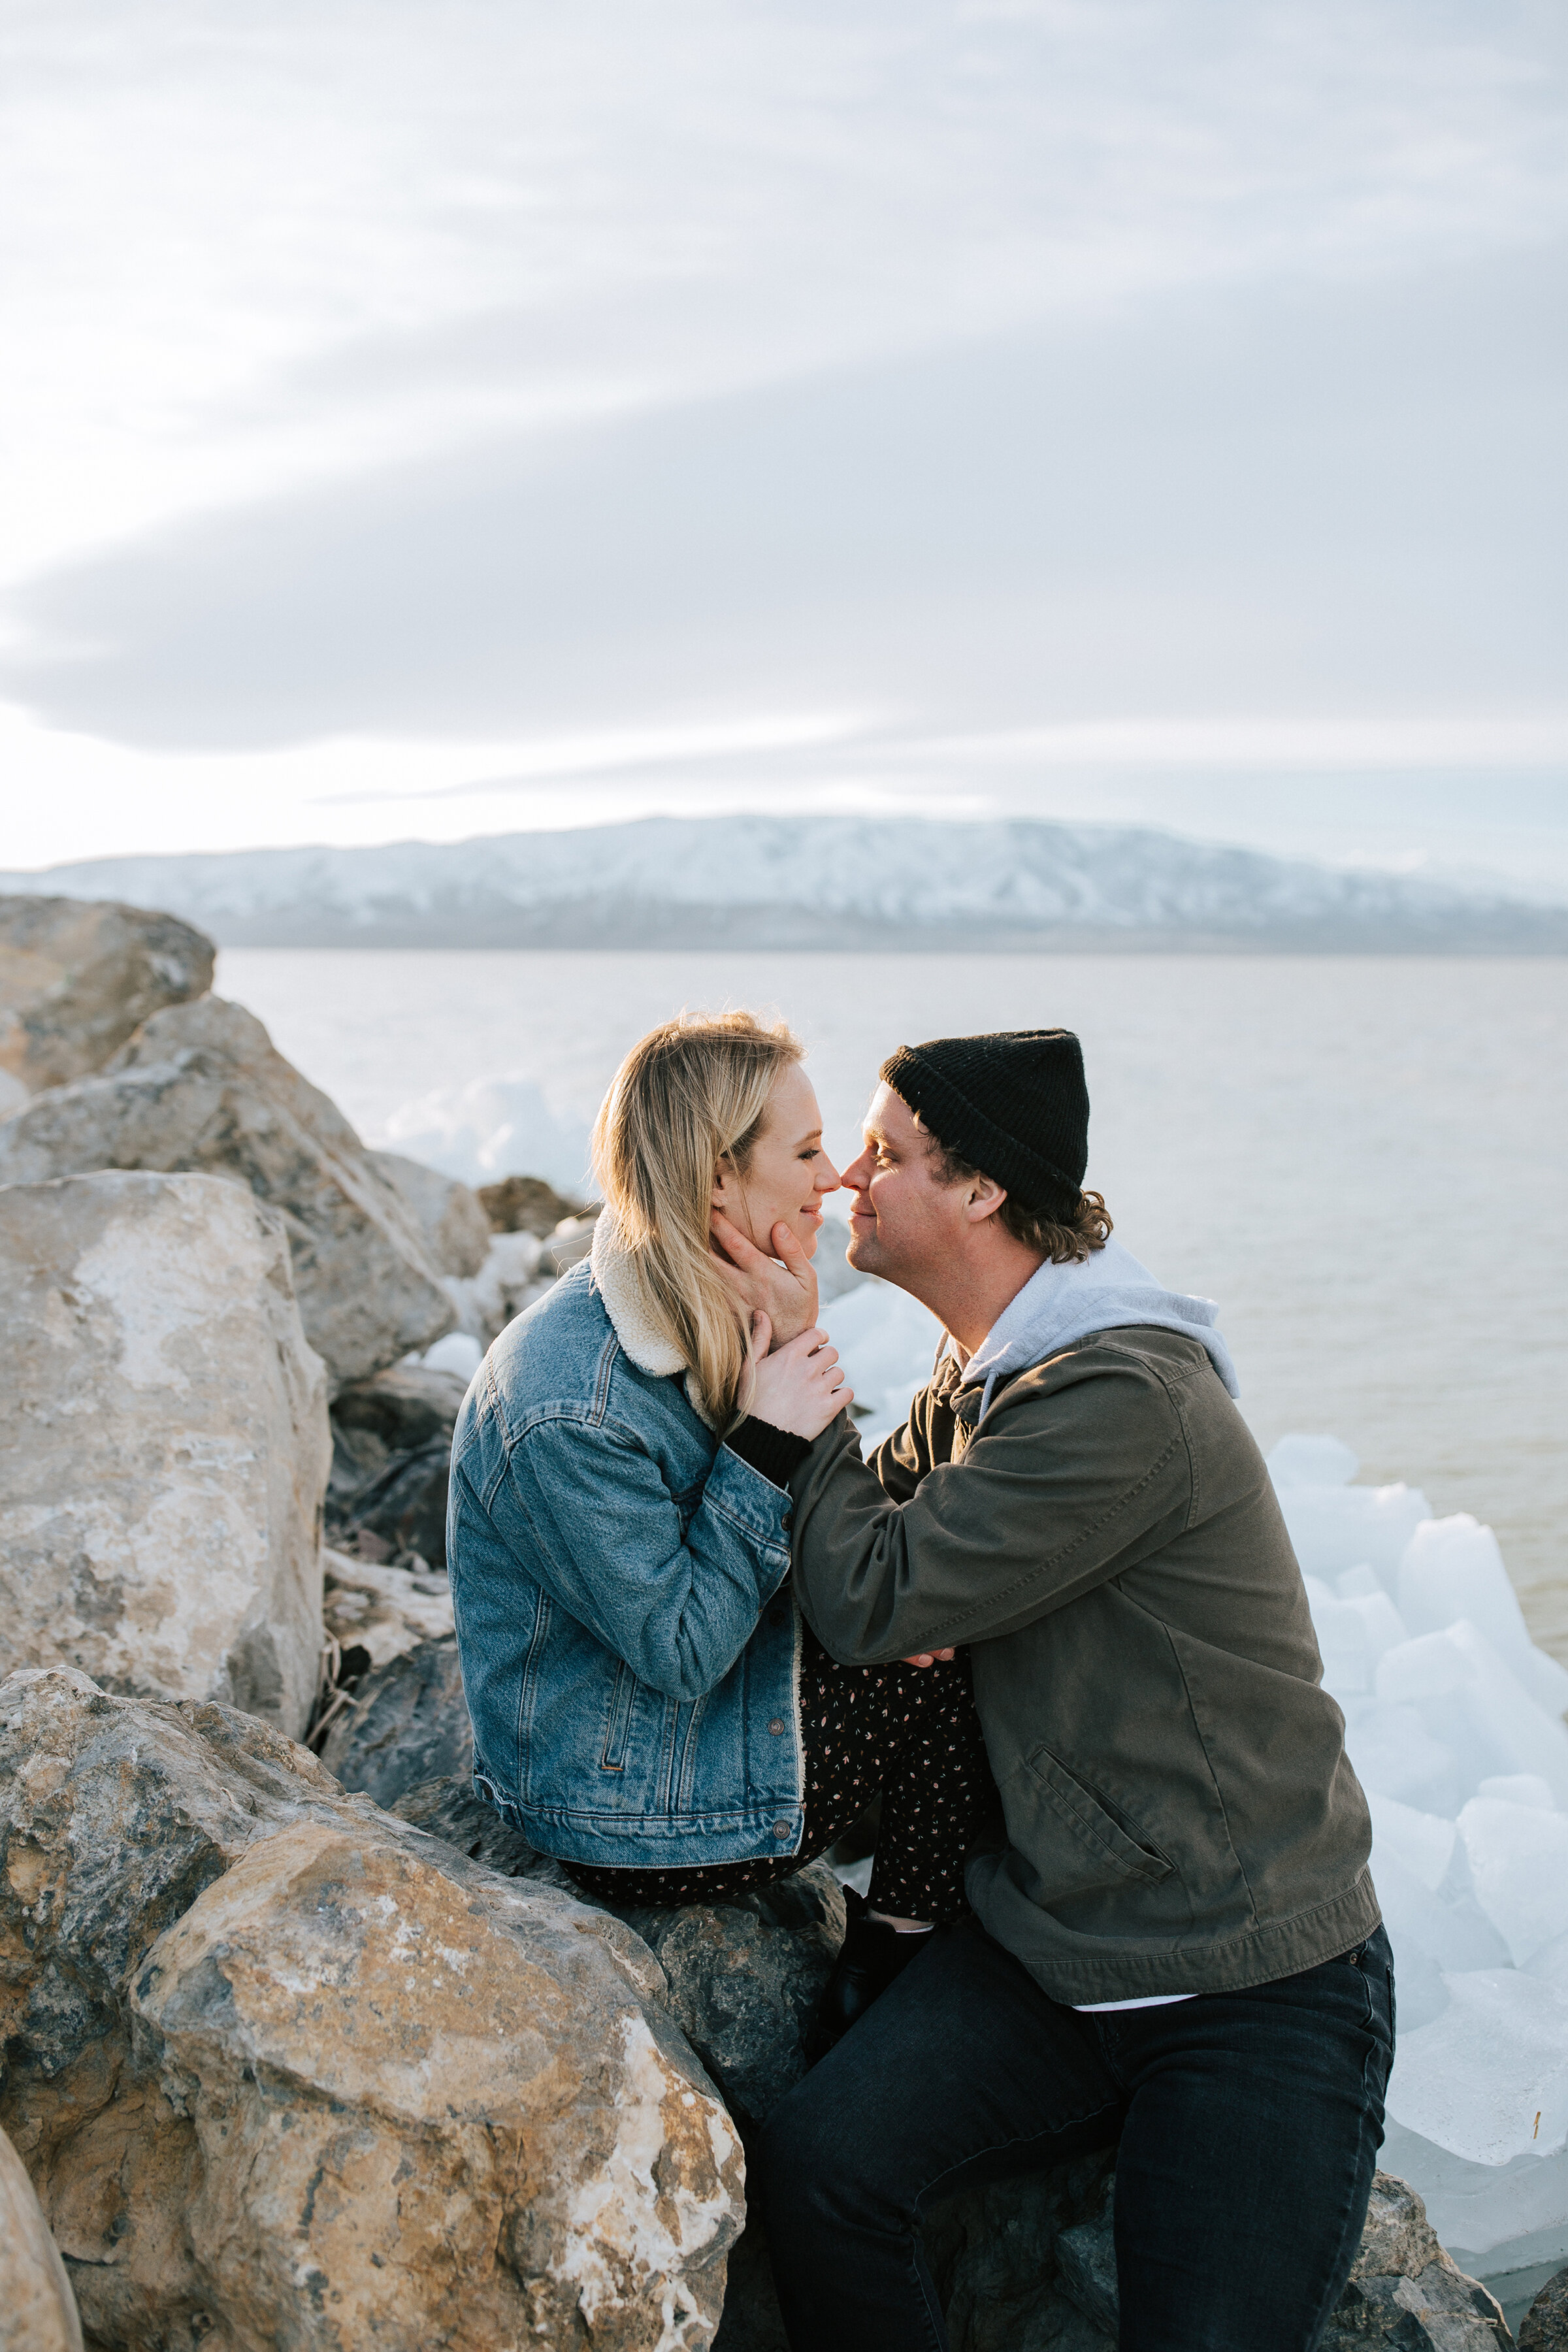  A beautiful couple lean in for a kiss in the beautiful rocky area in Utah mountains. Engagement session inspiration ideas and goals for outdoorsy couples couple goals couple pose inspiration client attire inspiration casual outfit inspiration for en